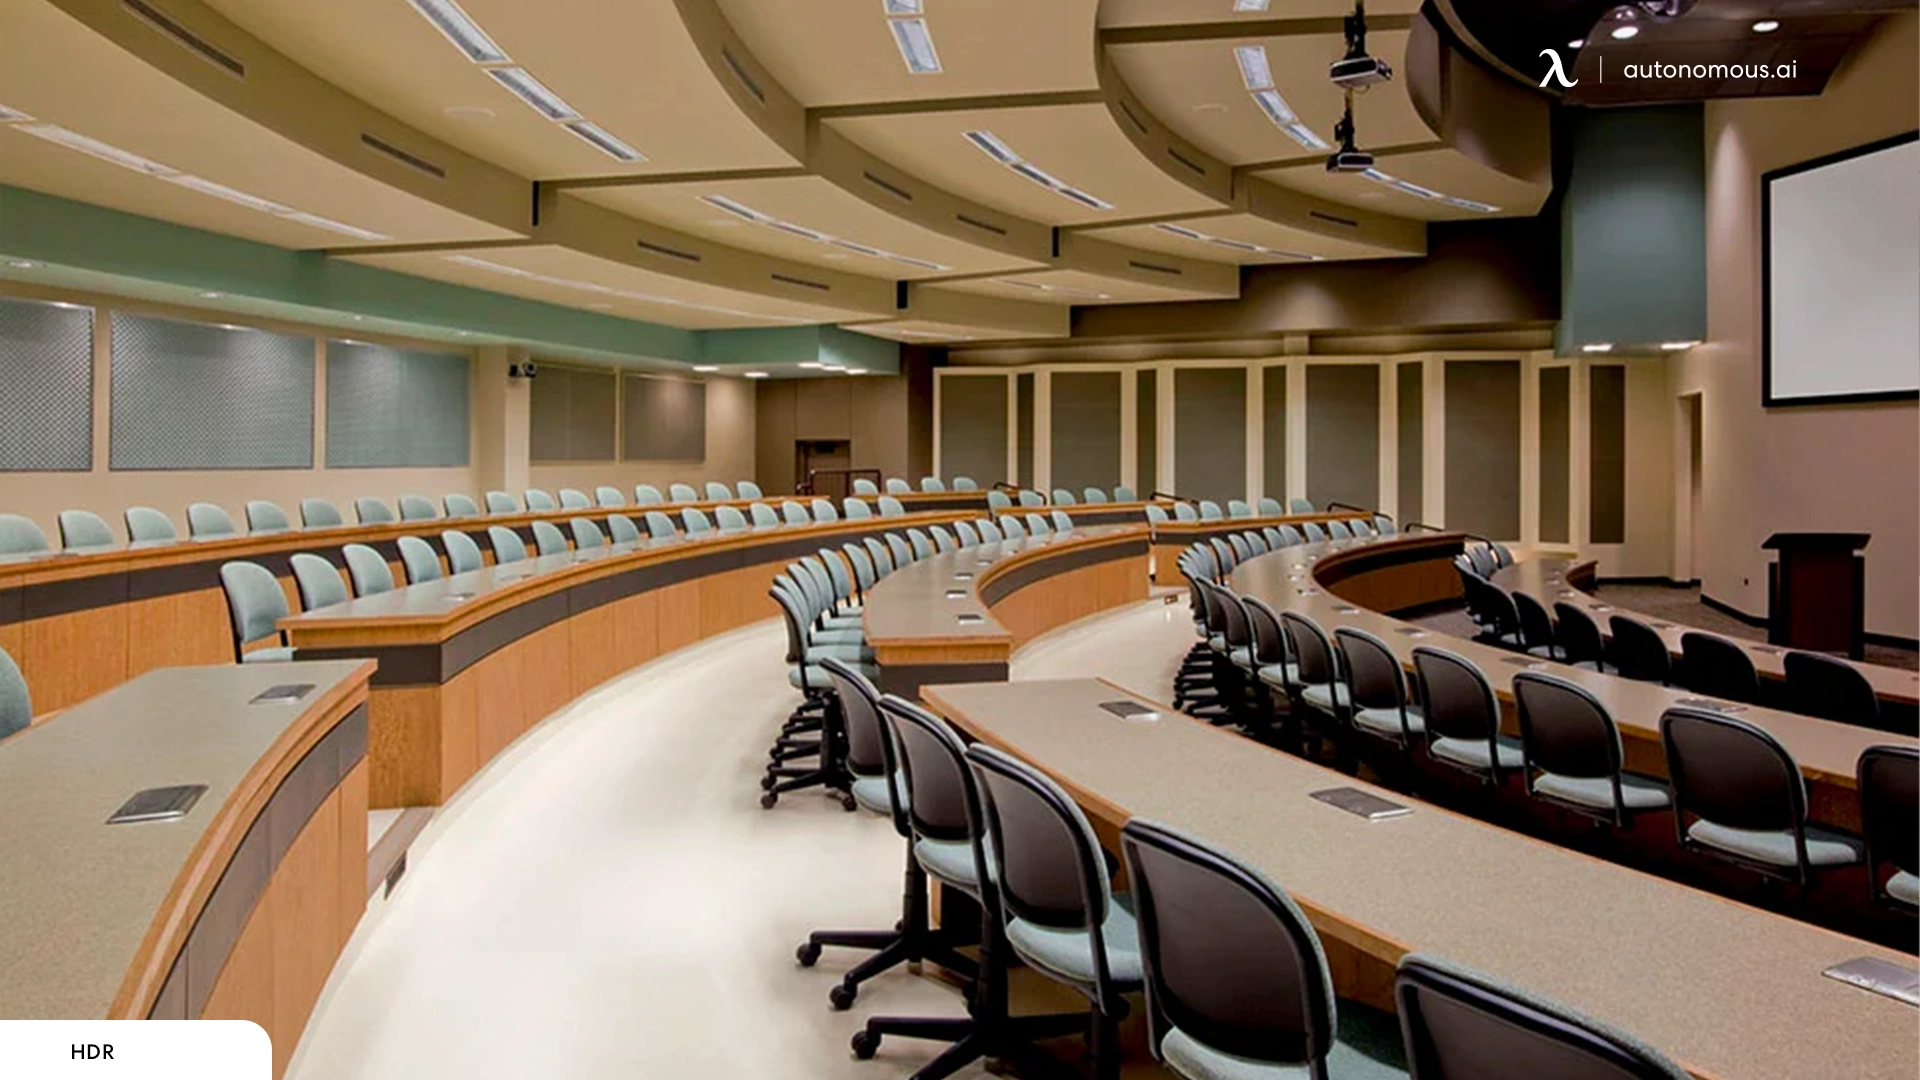 Understanding the Impact of Lecture Hall Seating